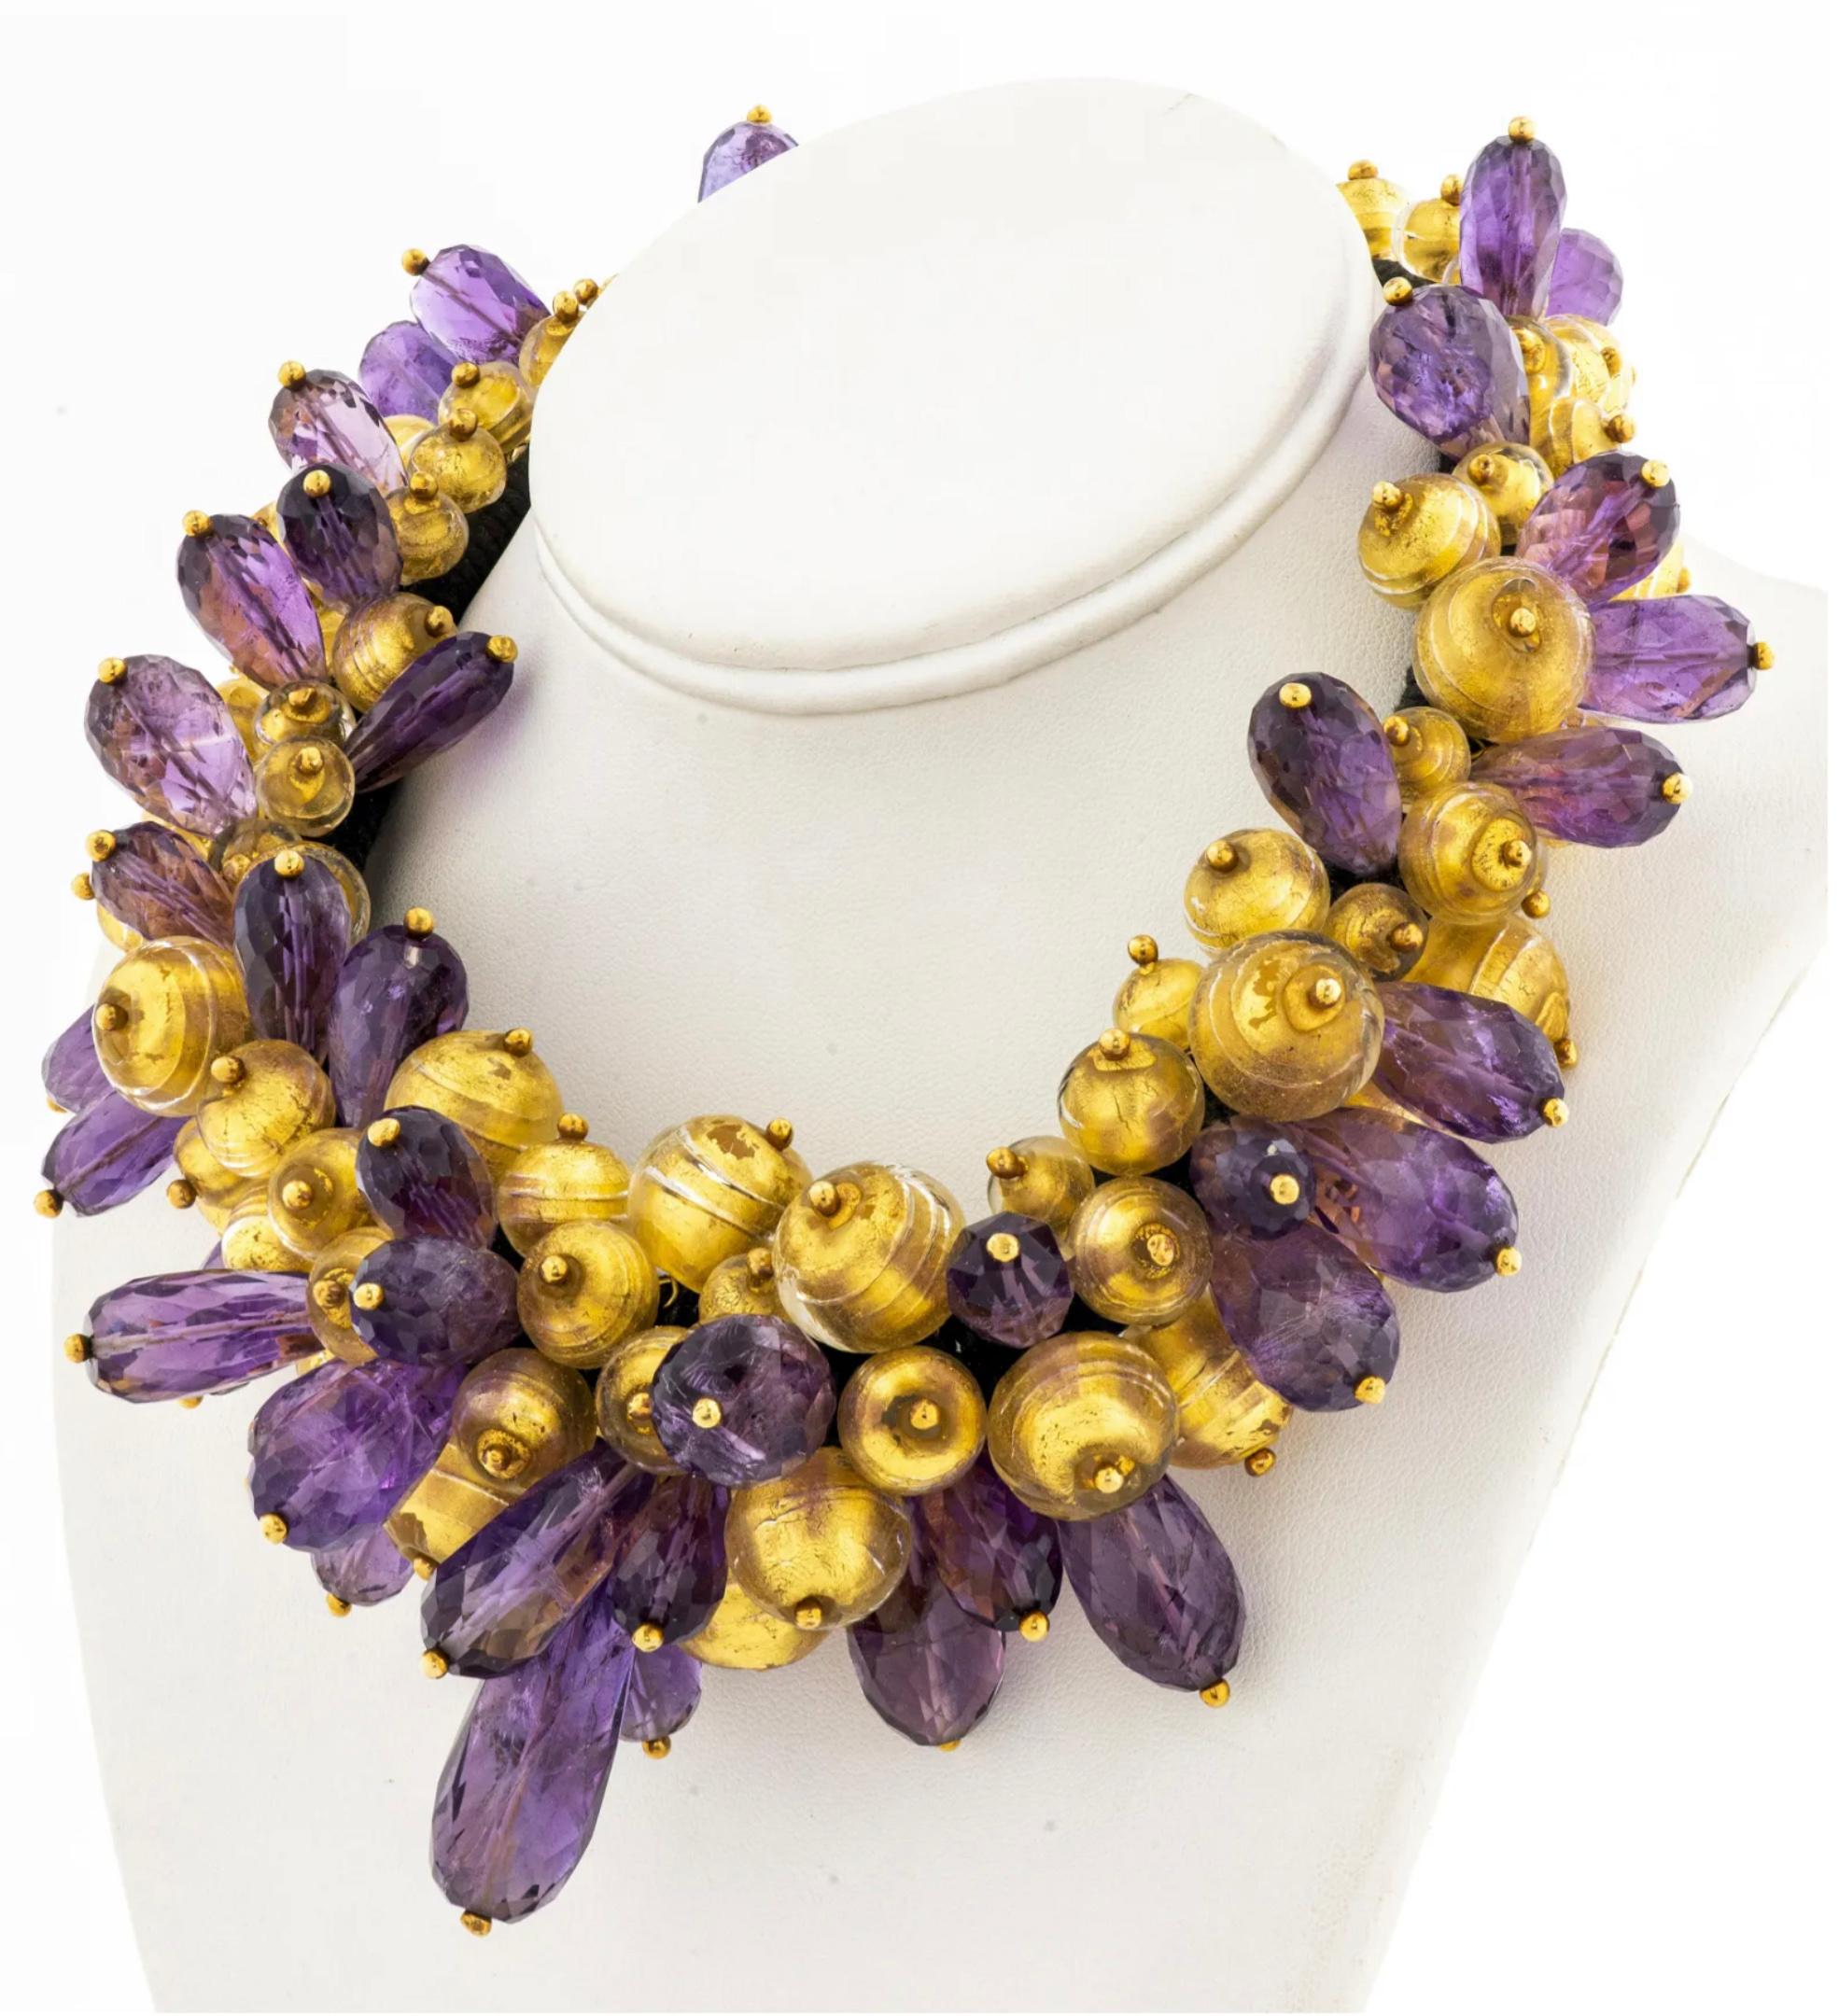 Lotus Arts de Vivre 18K yellow gold amethyst and venetian glass beaded bid style collar necklace, comprise of forty graduated oblong faceted-cut amethyst beads and approx: eighty-seven gold tone venetian glass beads; all capped with yellow gold ball